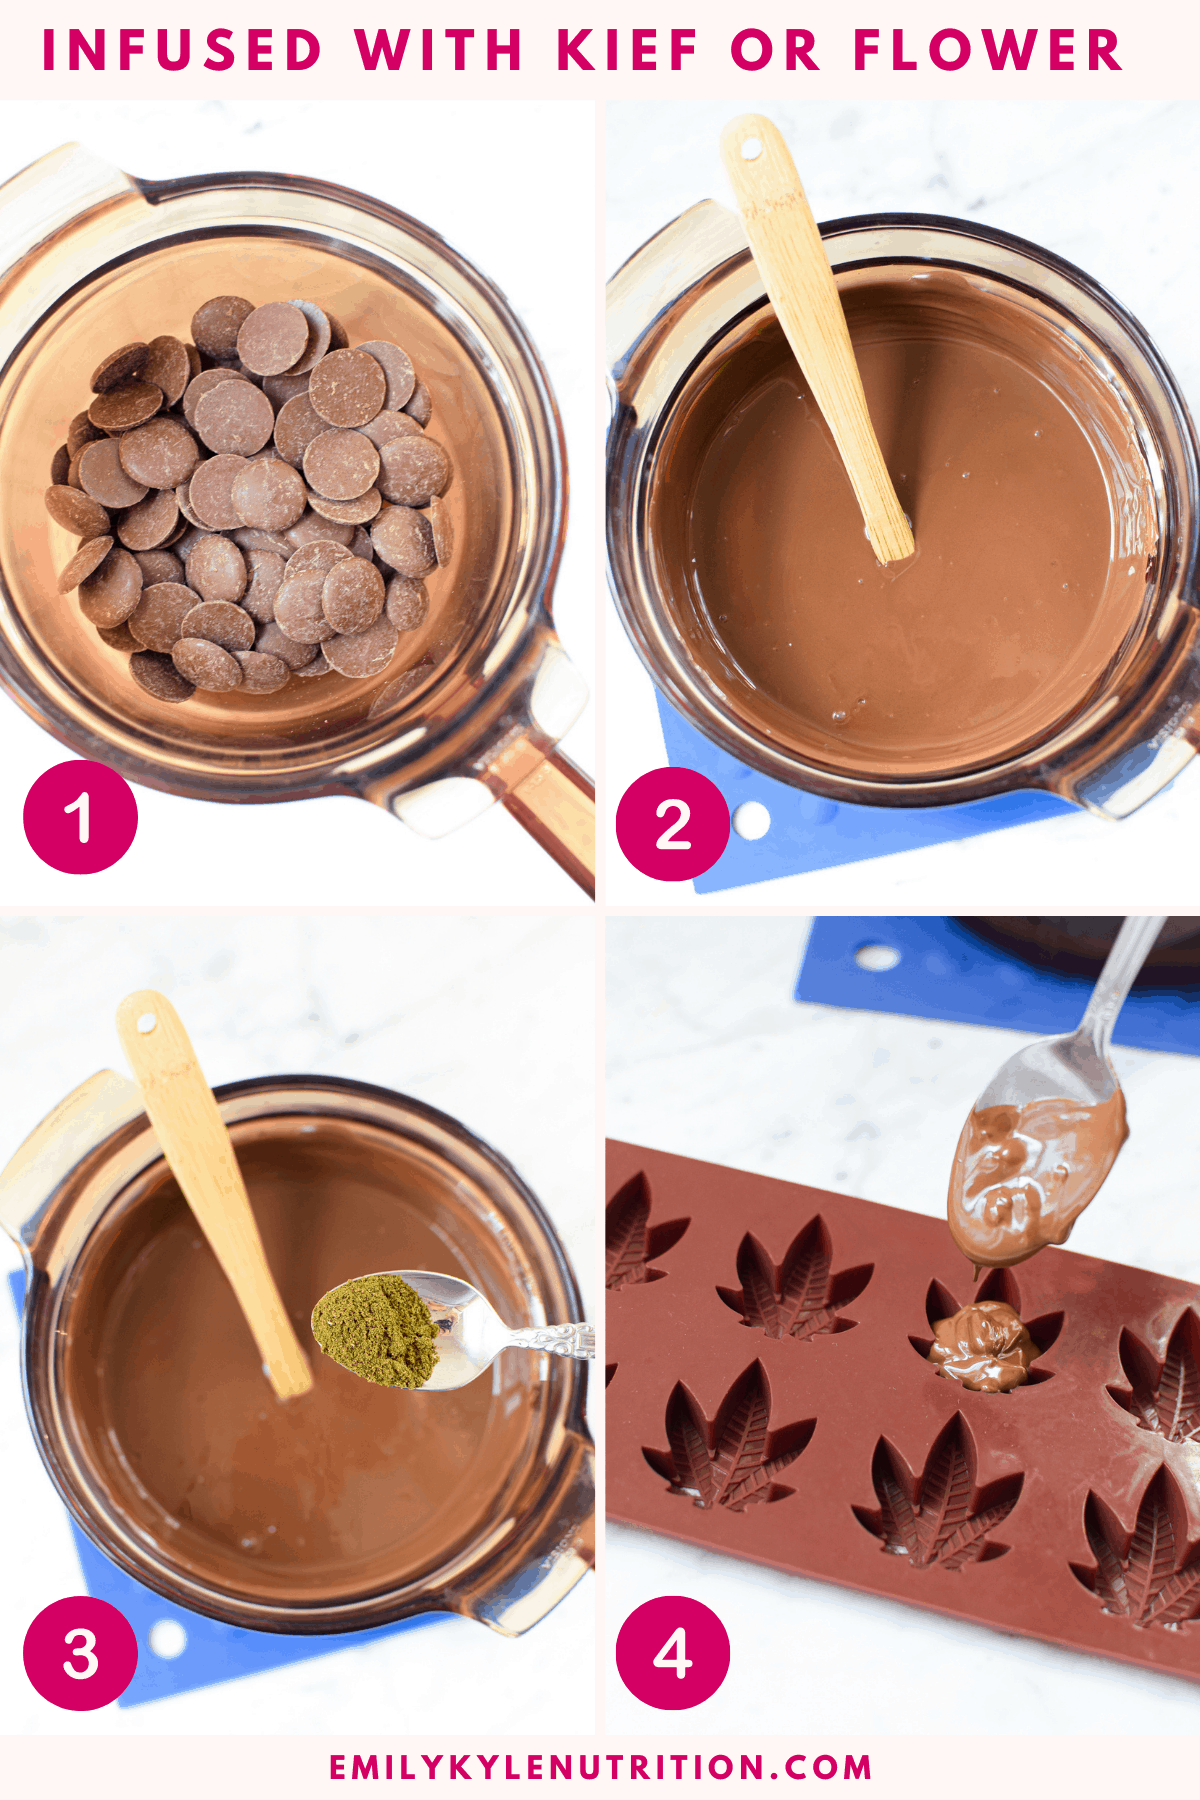 A 4 step collage showing how to infuse ground cannabis into chocolate using a double boiler to melt the chocolate, stirring it smooth, and pouring into a mold